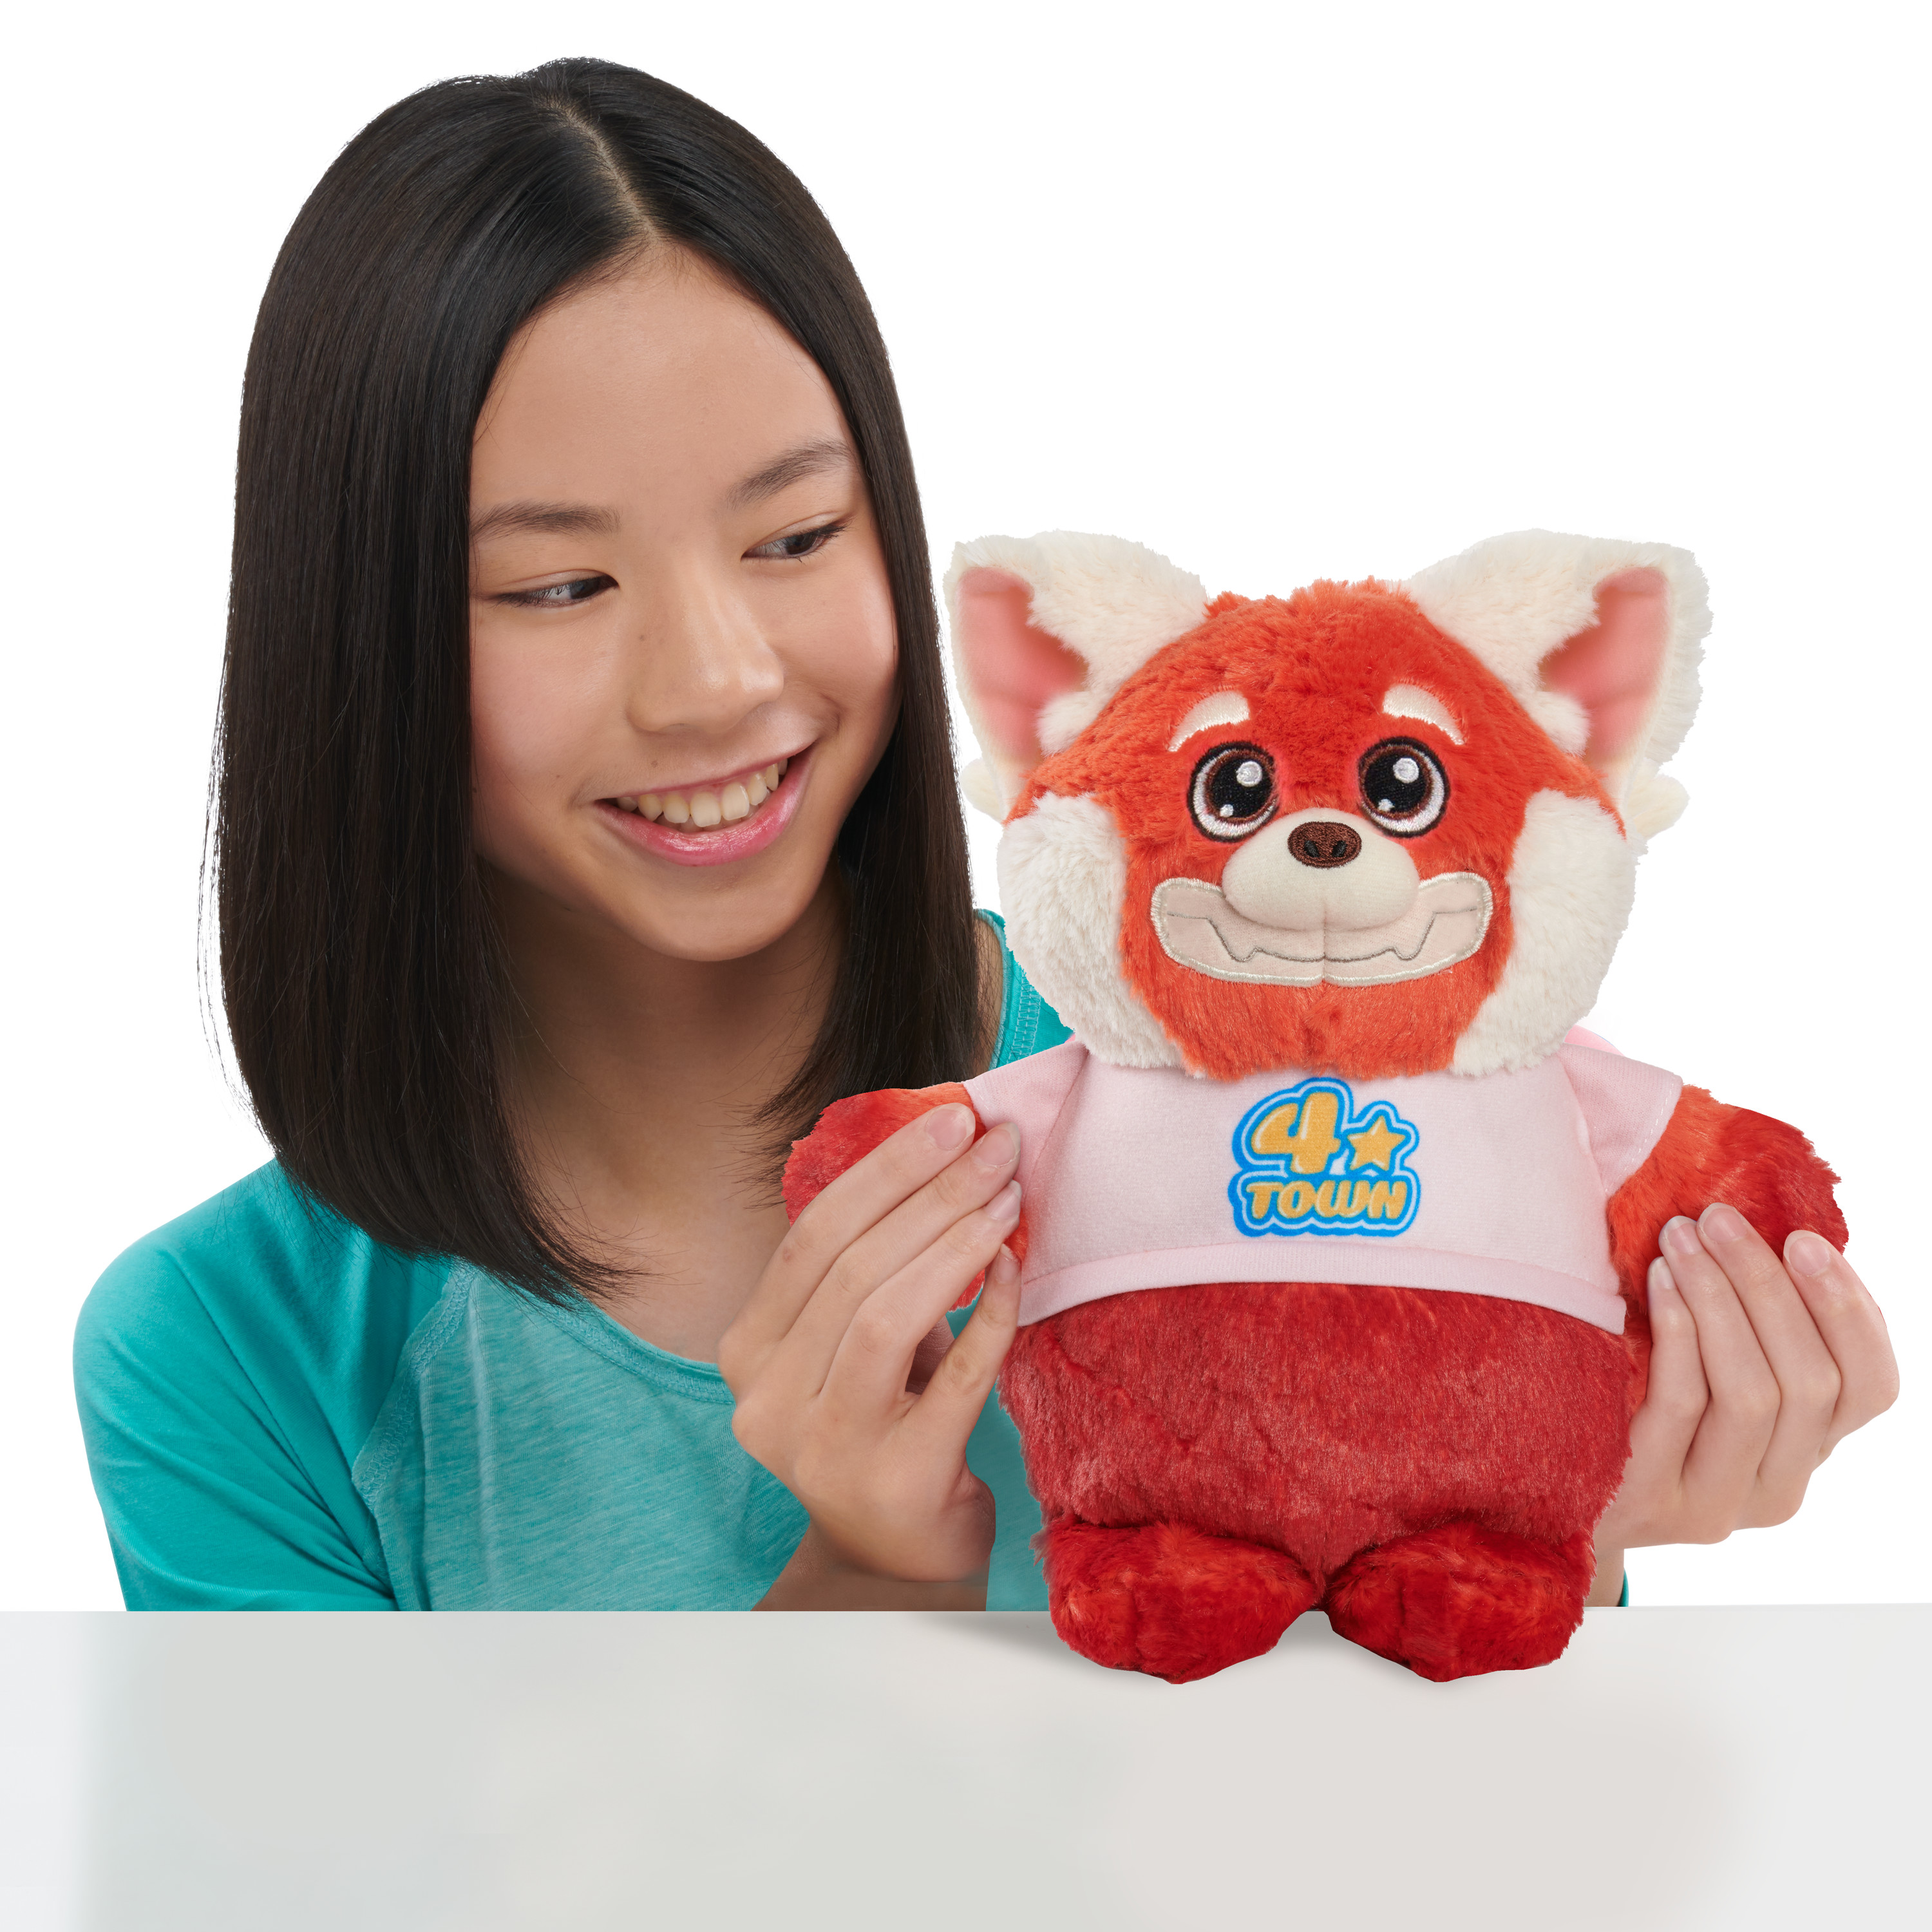 Disney and Pixar Turning Red – Red Panda Mei 11-inch Concert Plush with Lights and Sounds, Officially Licensed Kids Toys for Ages 3 Up, Gifts and Presents - image 4 of 8